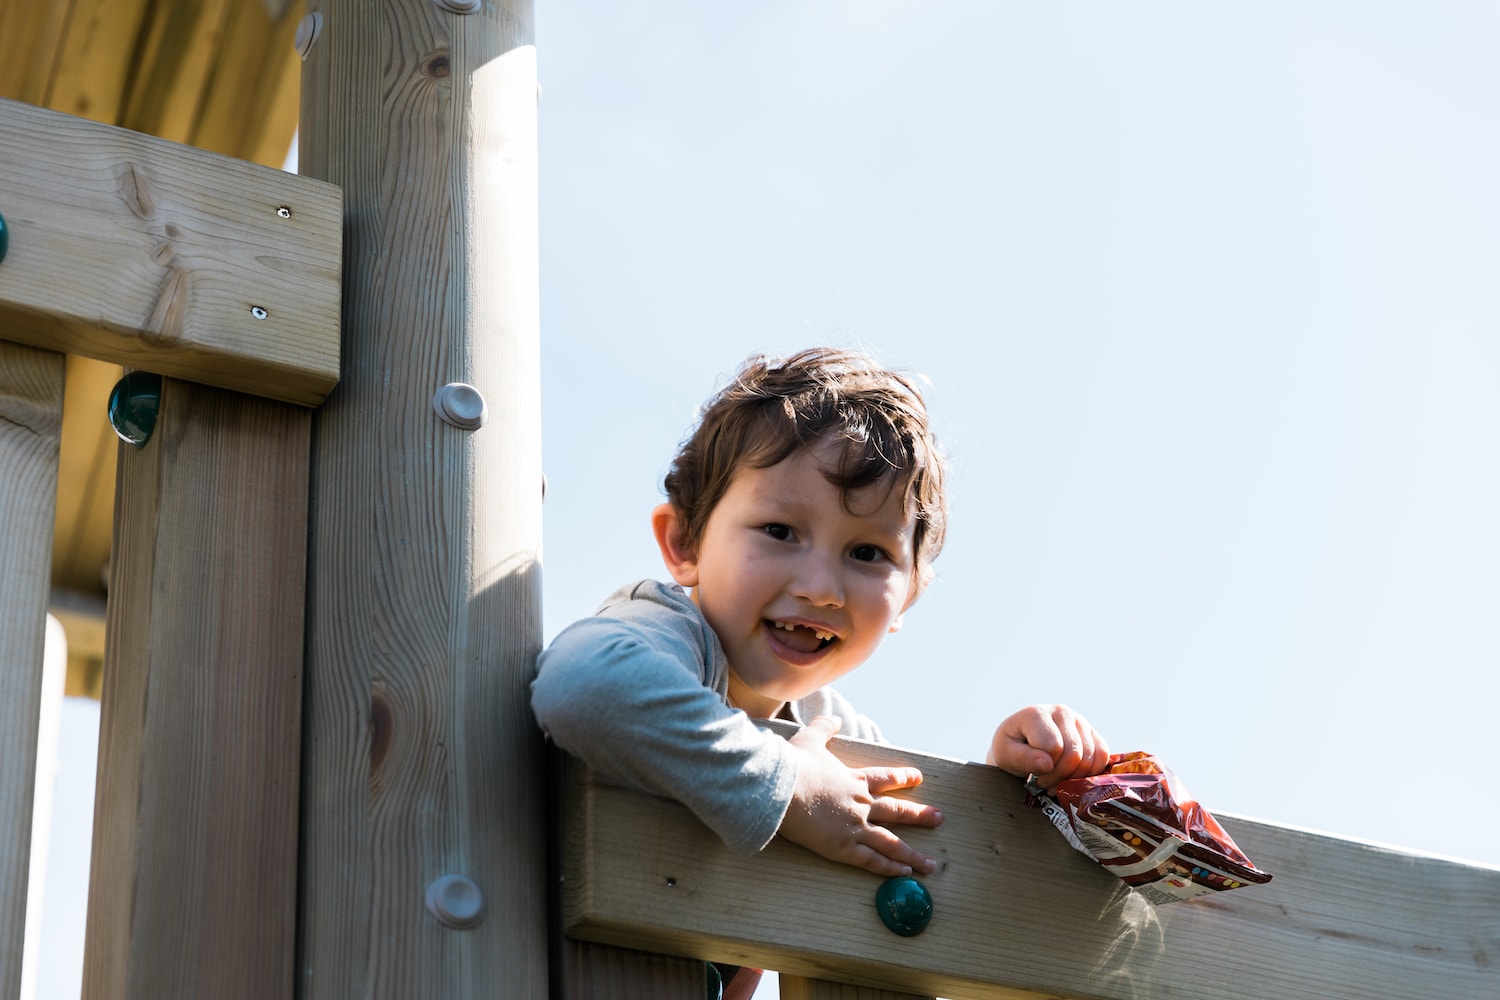 A joyful young boy leaning over the edge of a wooden play structure, with a clear blue sky in the background, holding a snack packet in his hand.